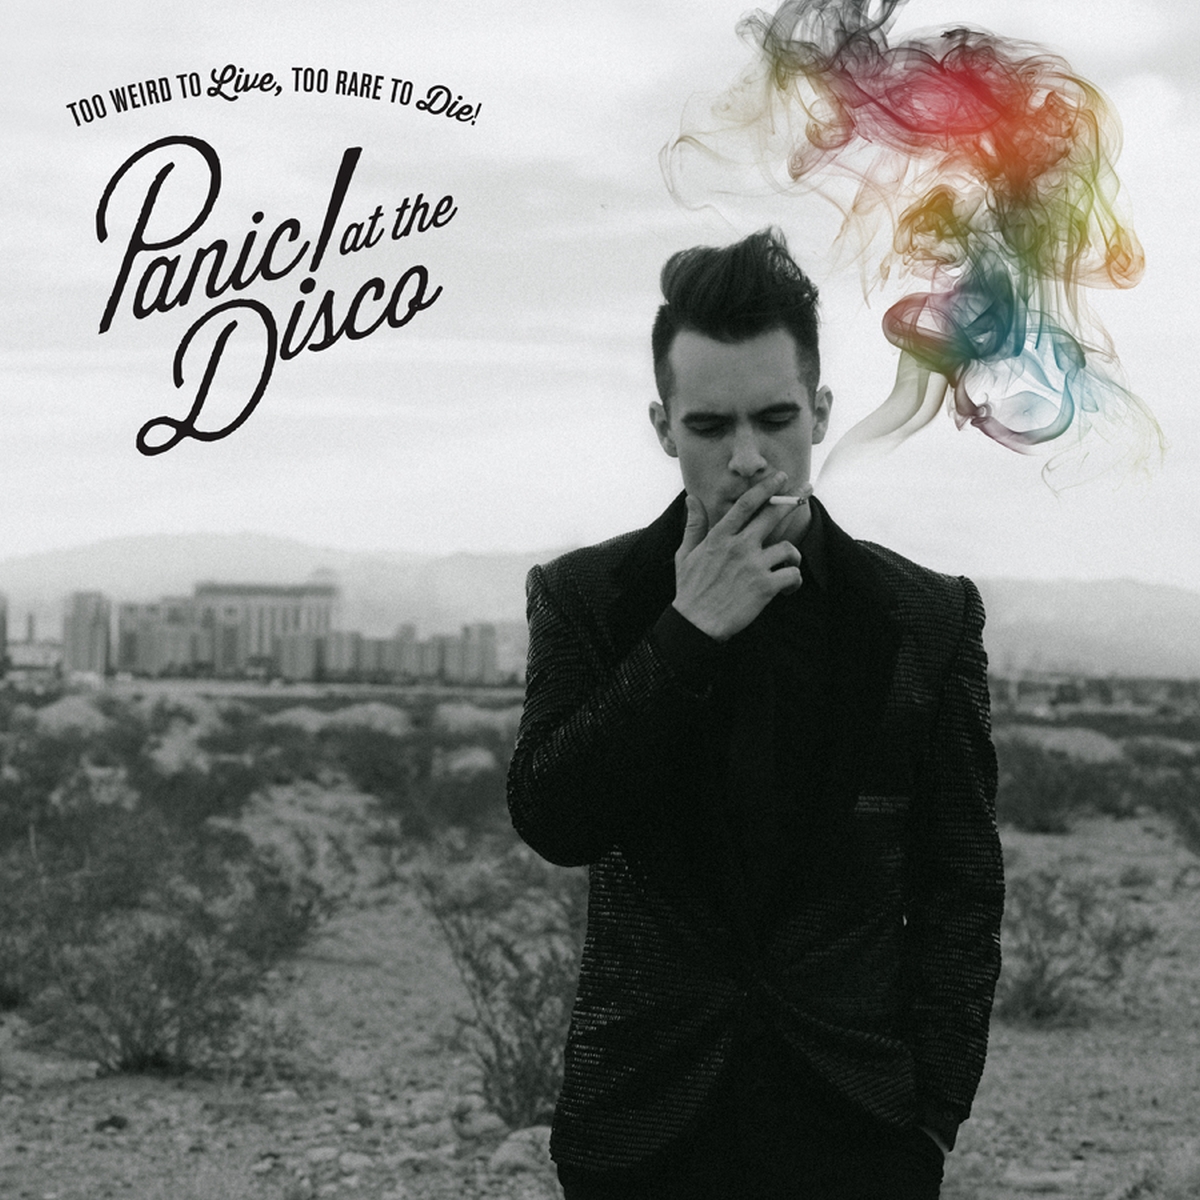 Panic! At The Disco - "Too Weird To Live, Too Rare To Die!“